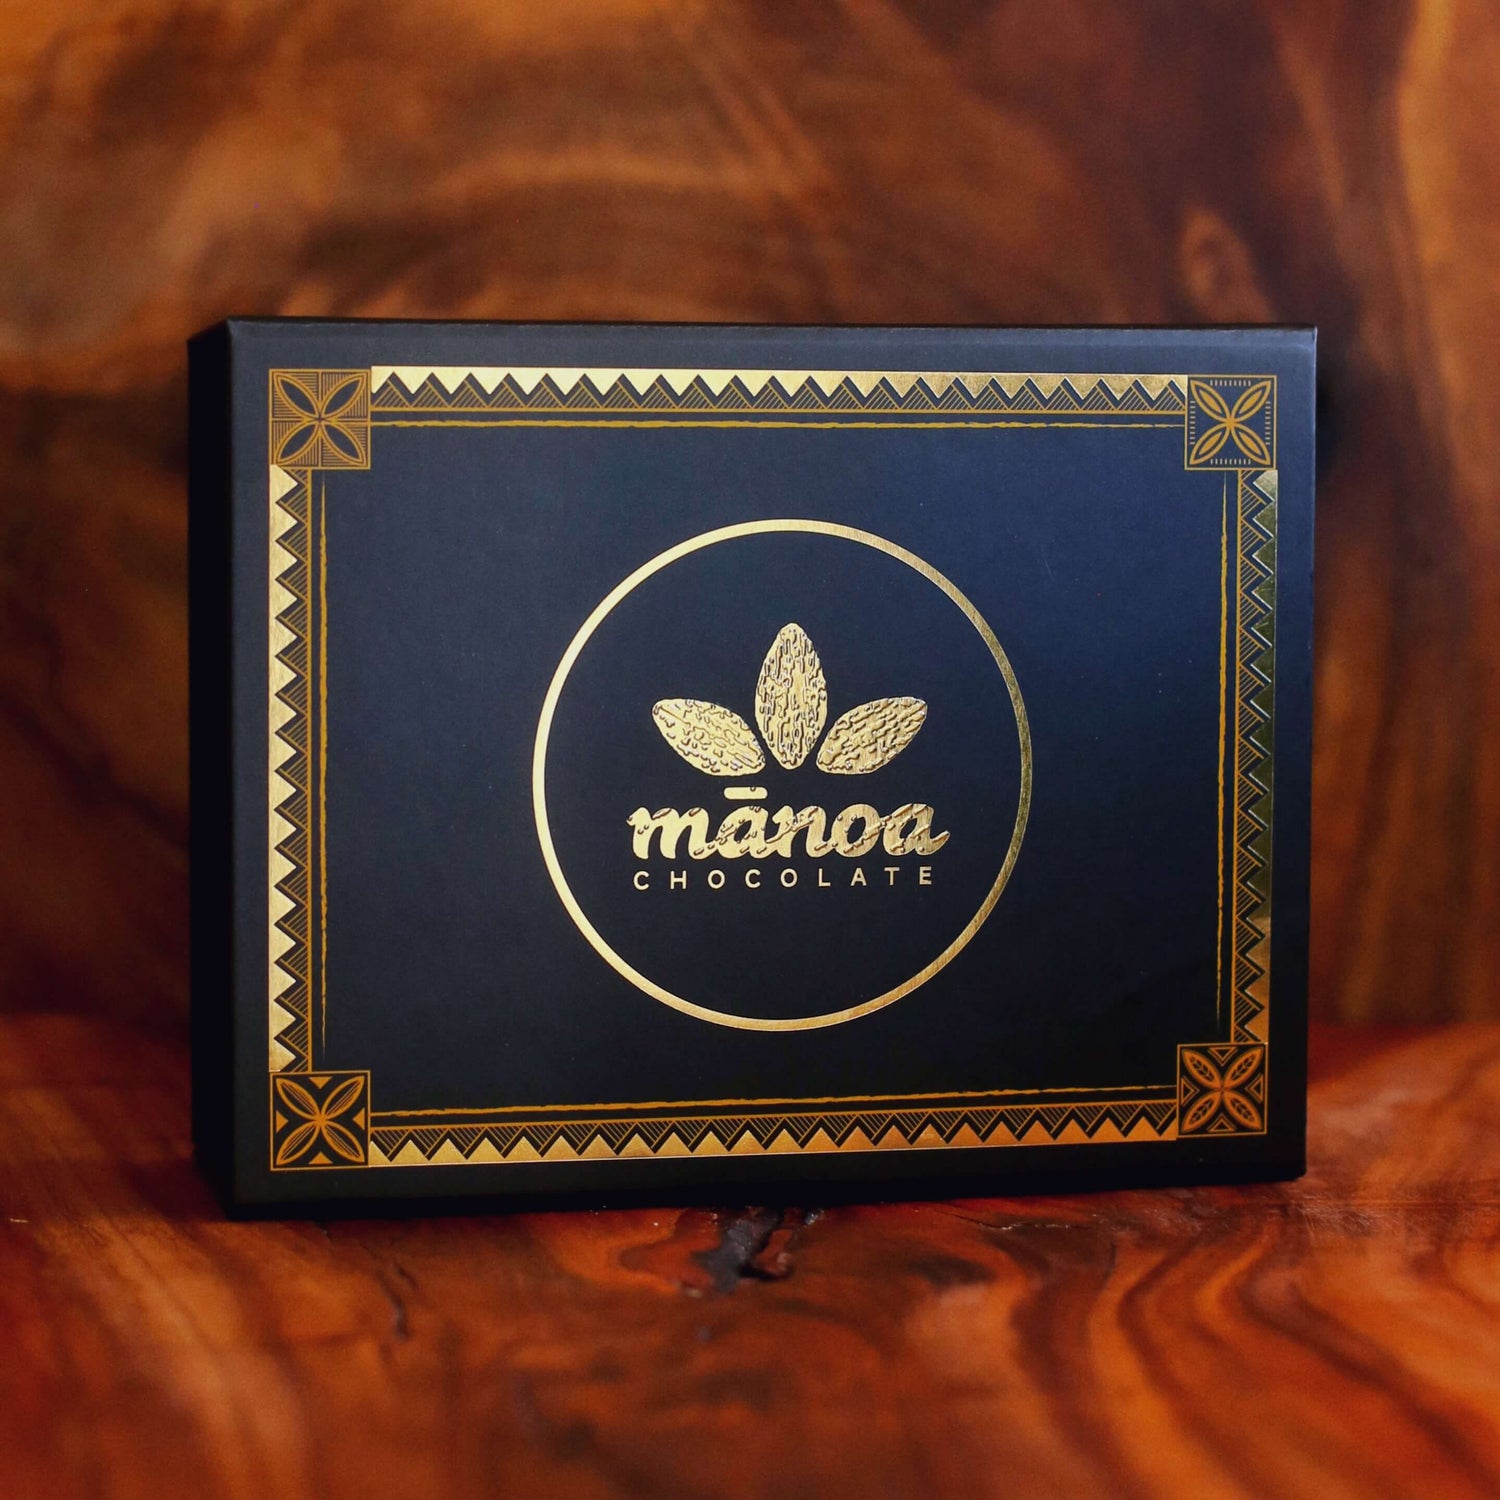 Image of gift box of chocolate with gold Manoa logo